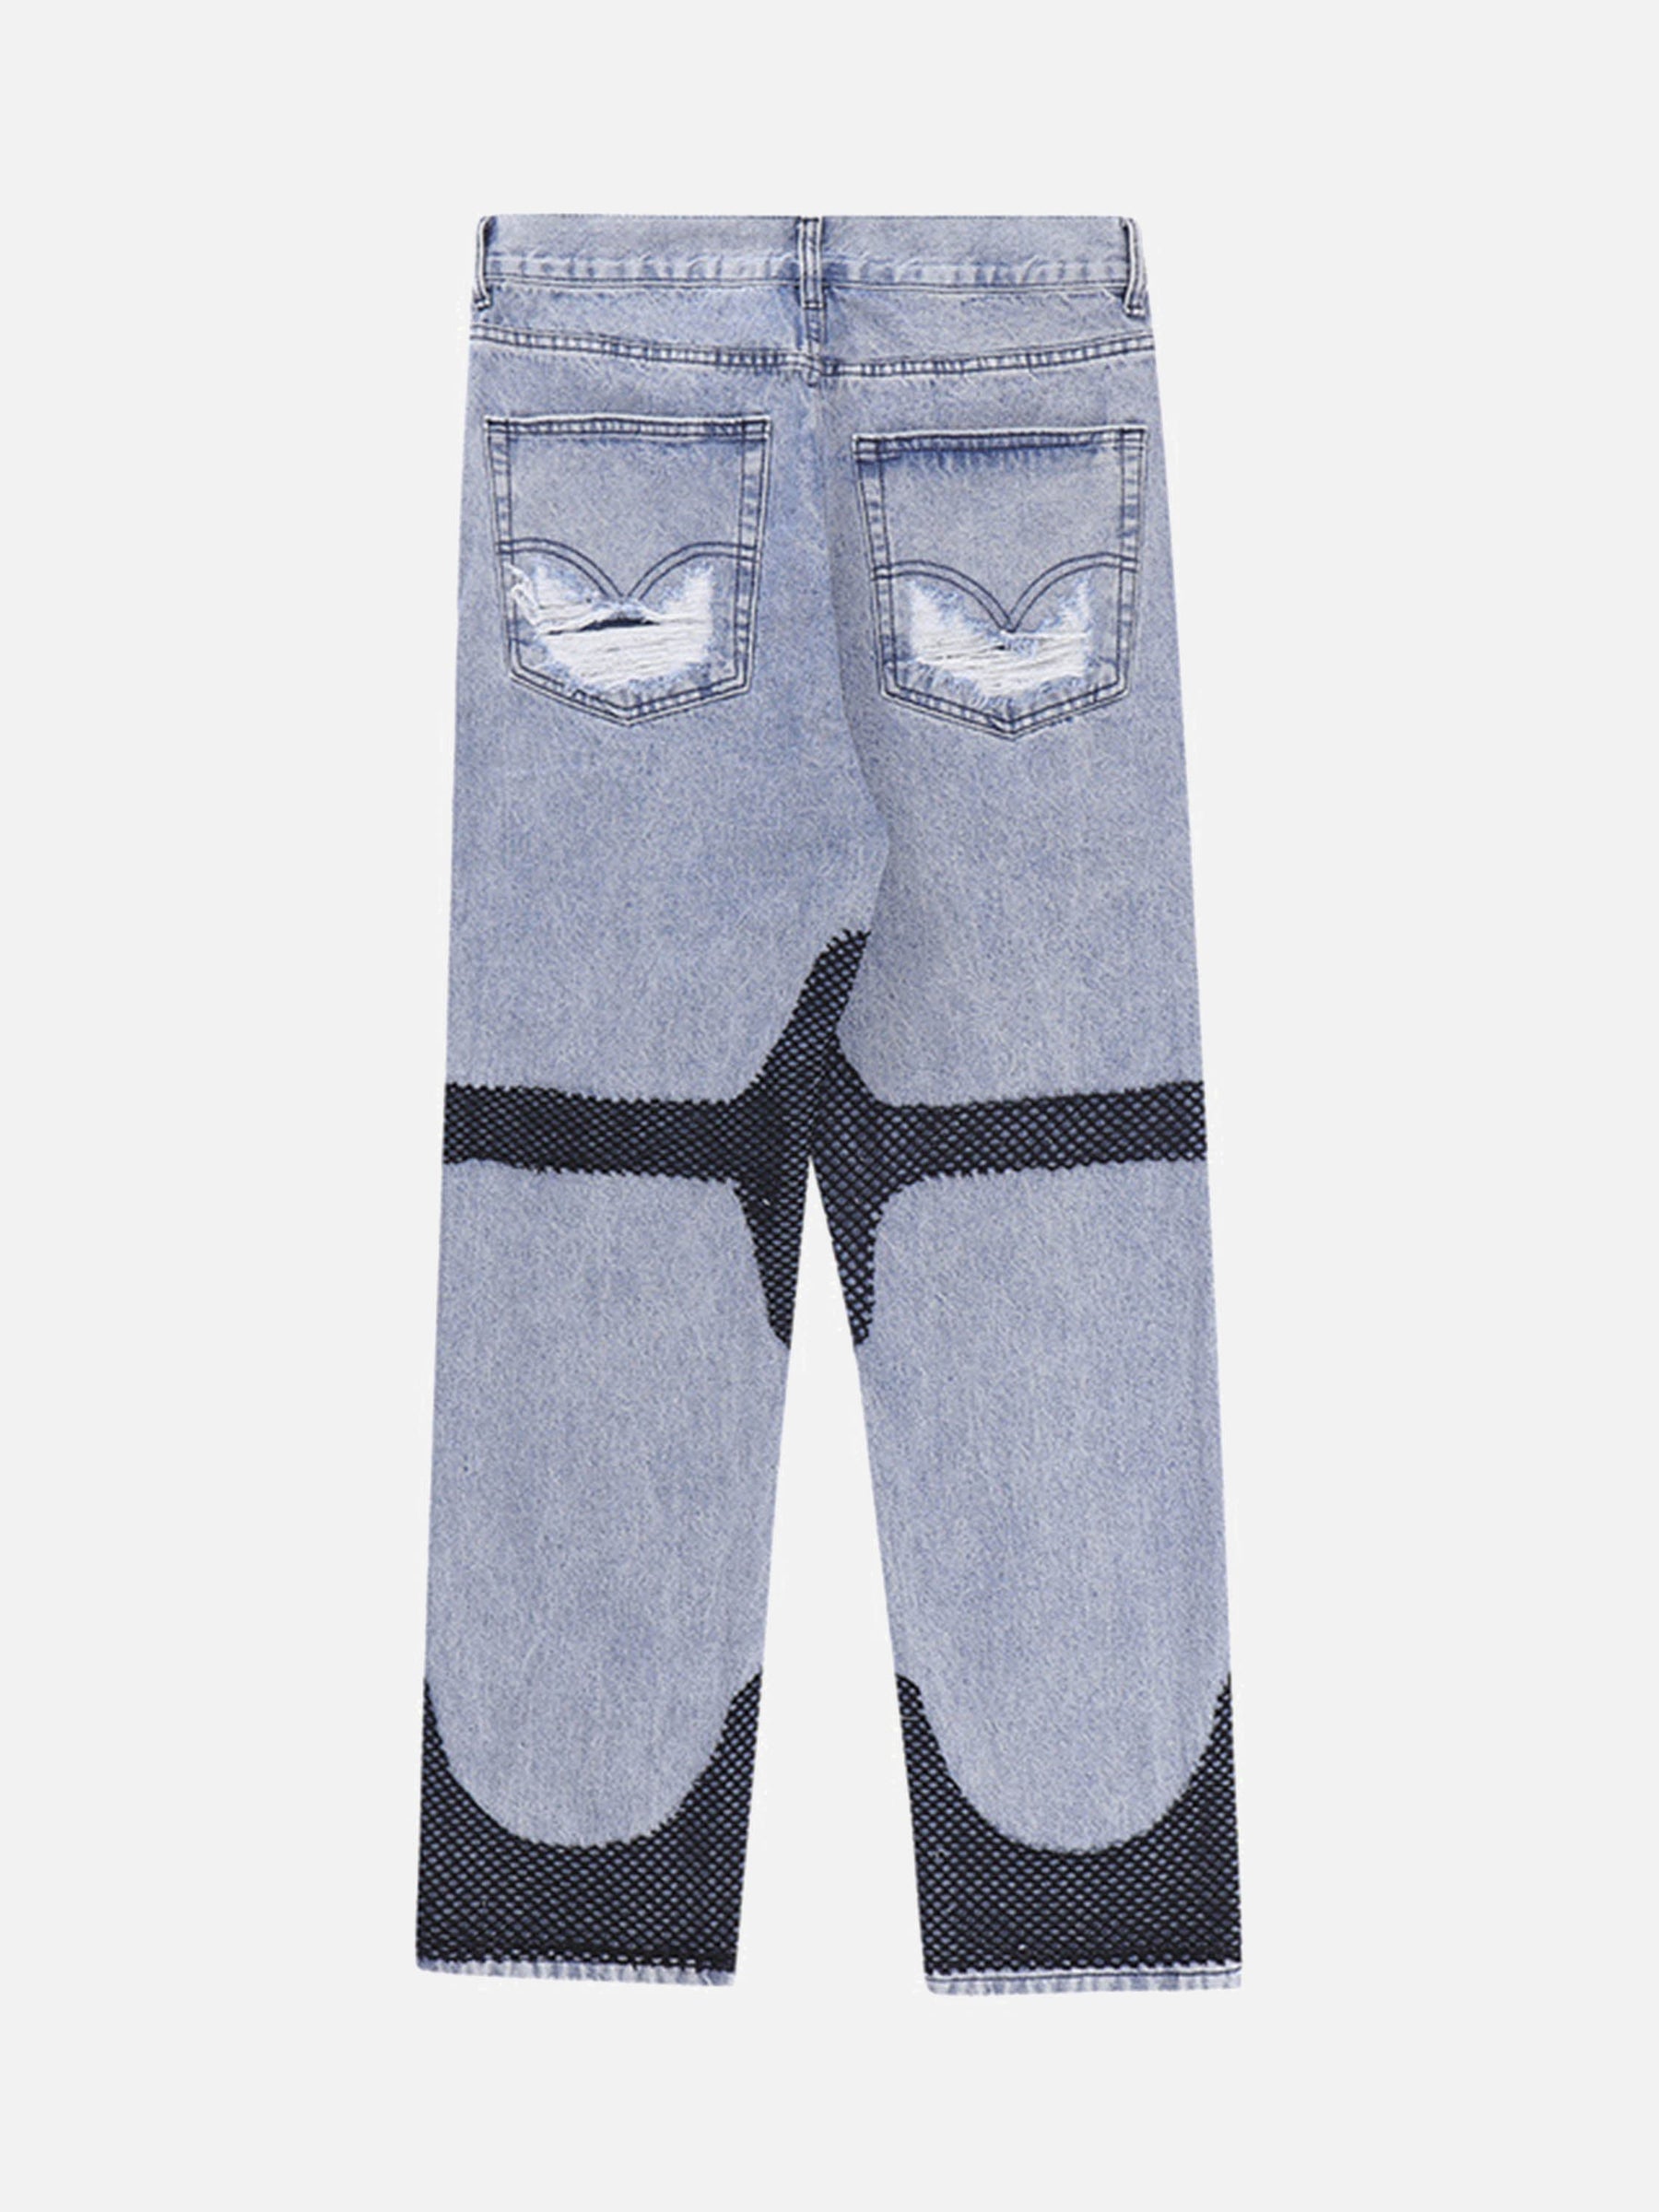 LUXENFY™ - Washed And Distressed Color-damaging Straight-leg Jeans luxenfy.com